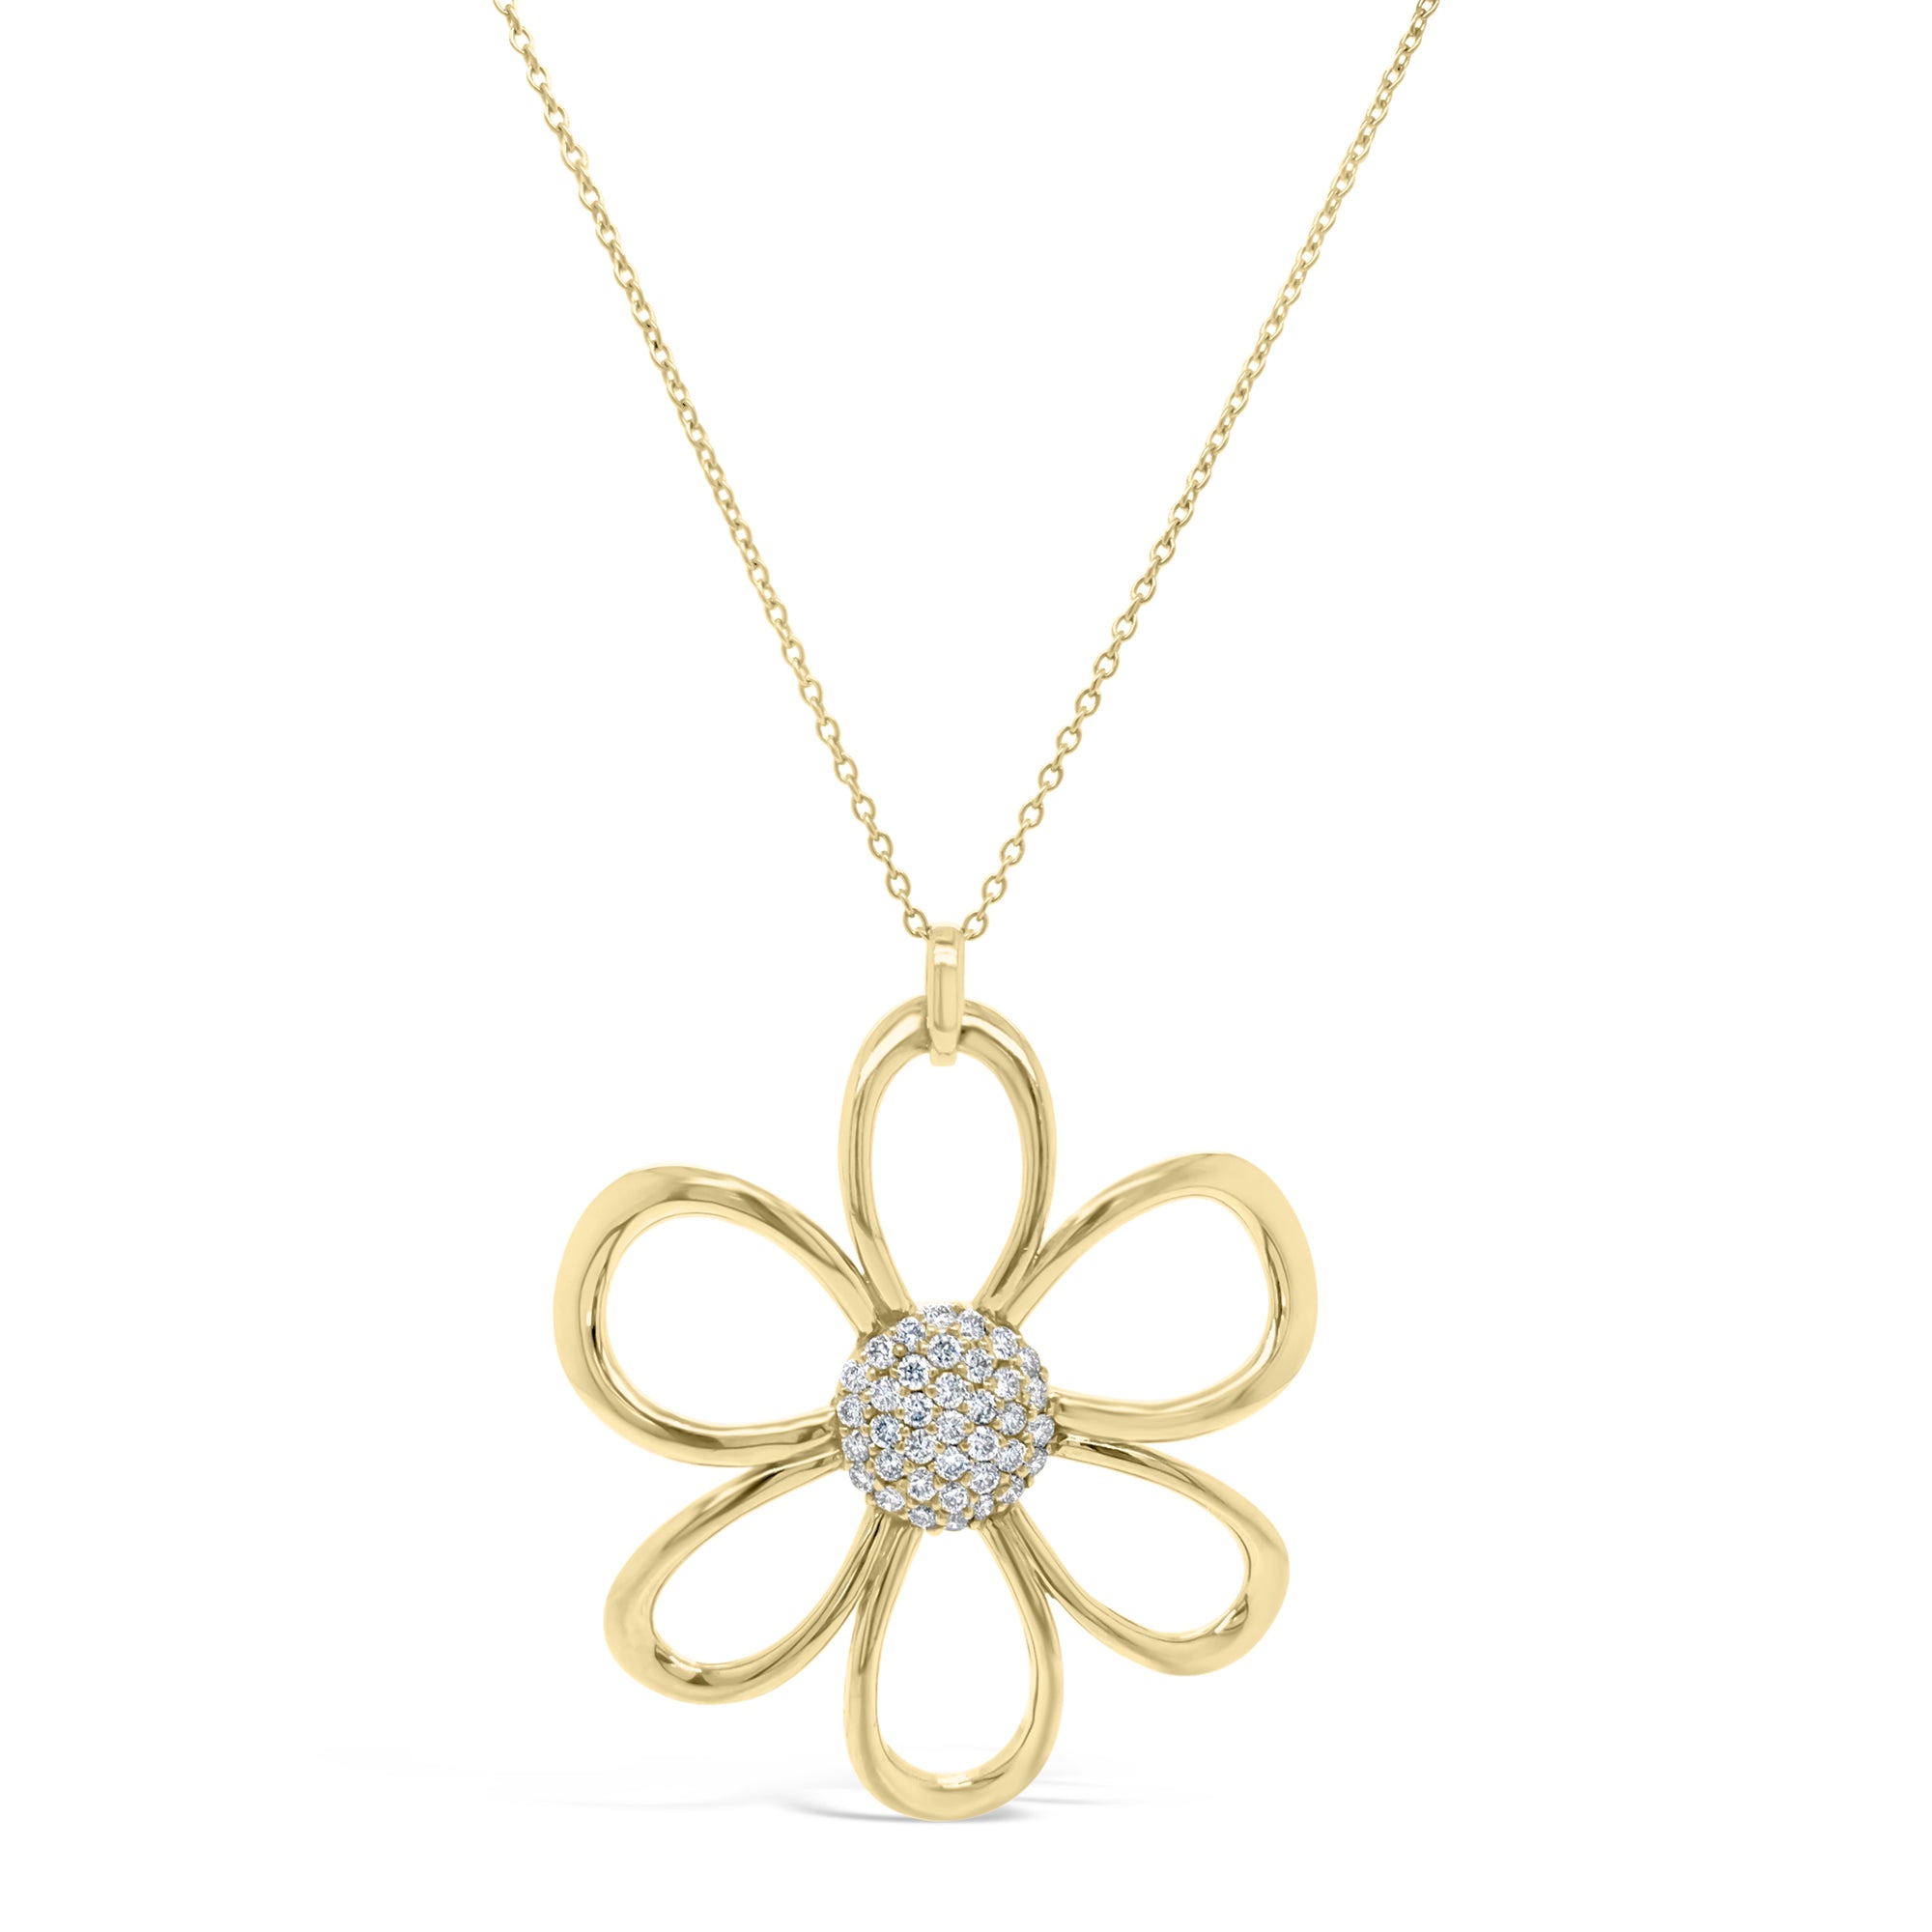 Diamond Open Daisy Pendant Necklace  14K gold weighing 9.63 grams.  - totaling 0.59 carats.